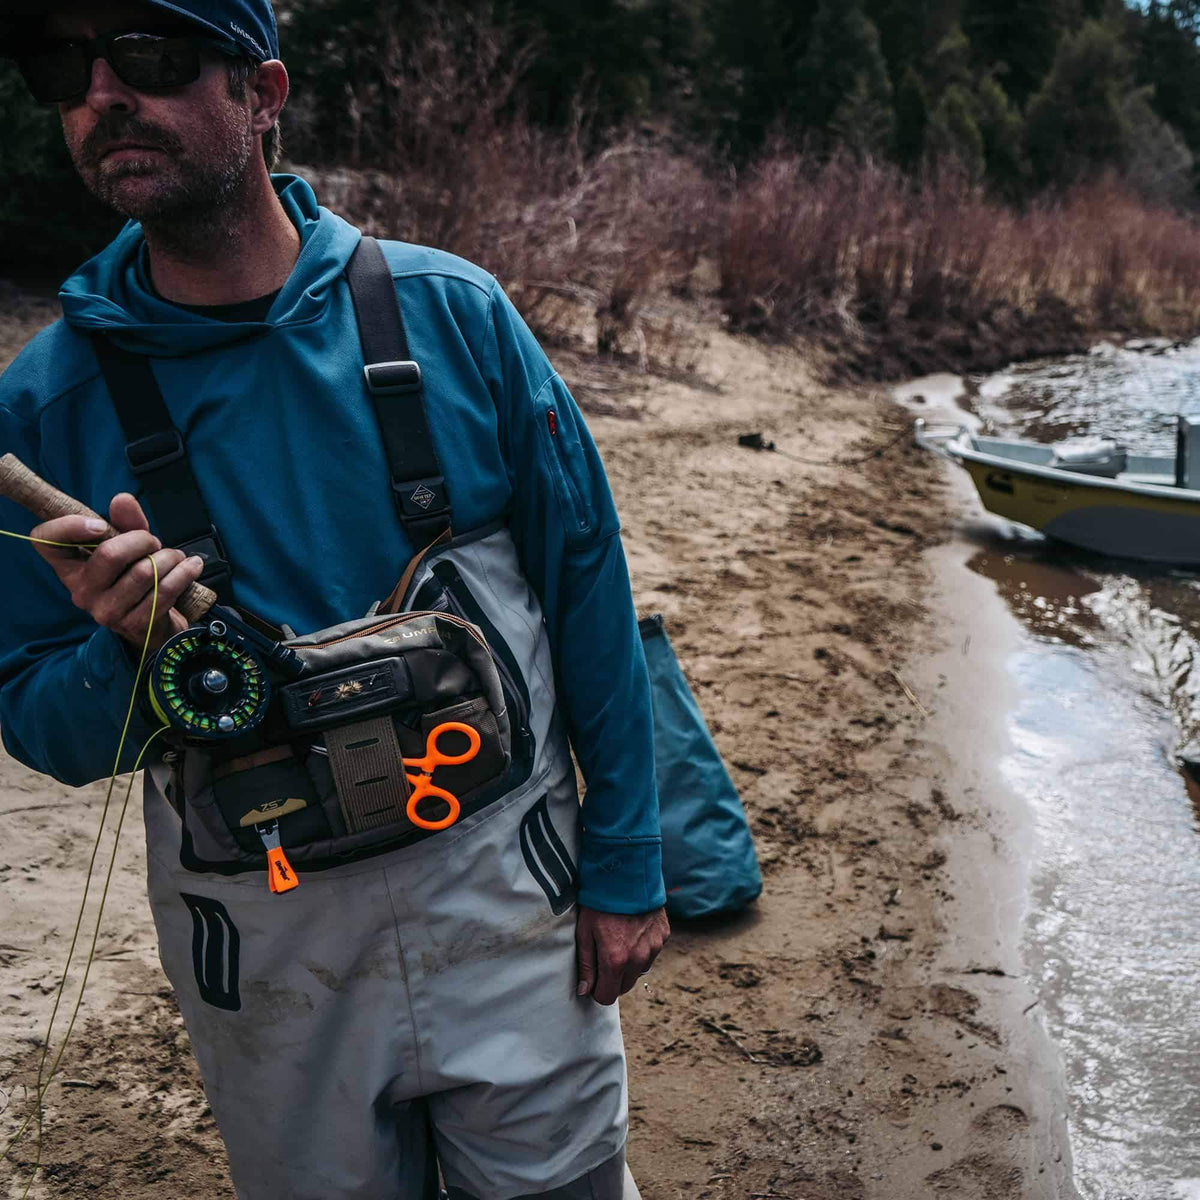 umpqua-zs2-Wader-Fishing-Chest-Pack-Camo-On-The-River-Looking-Square-Opt.jpg